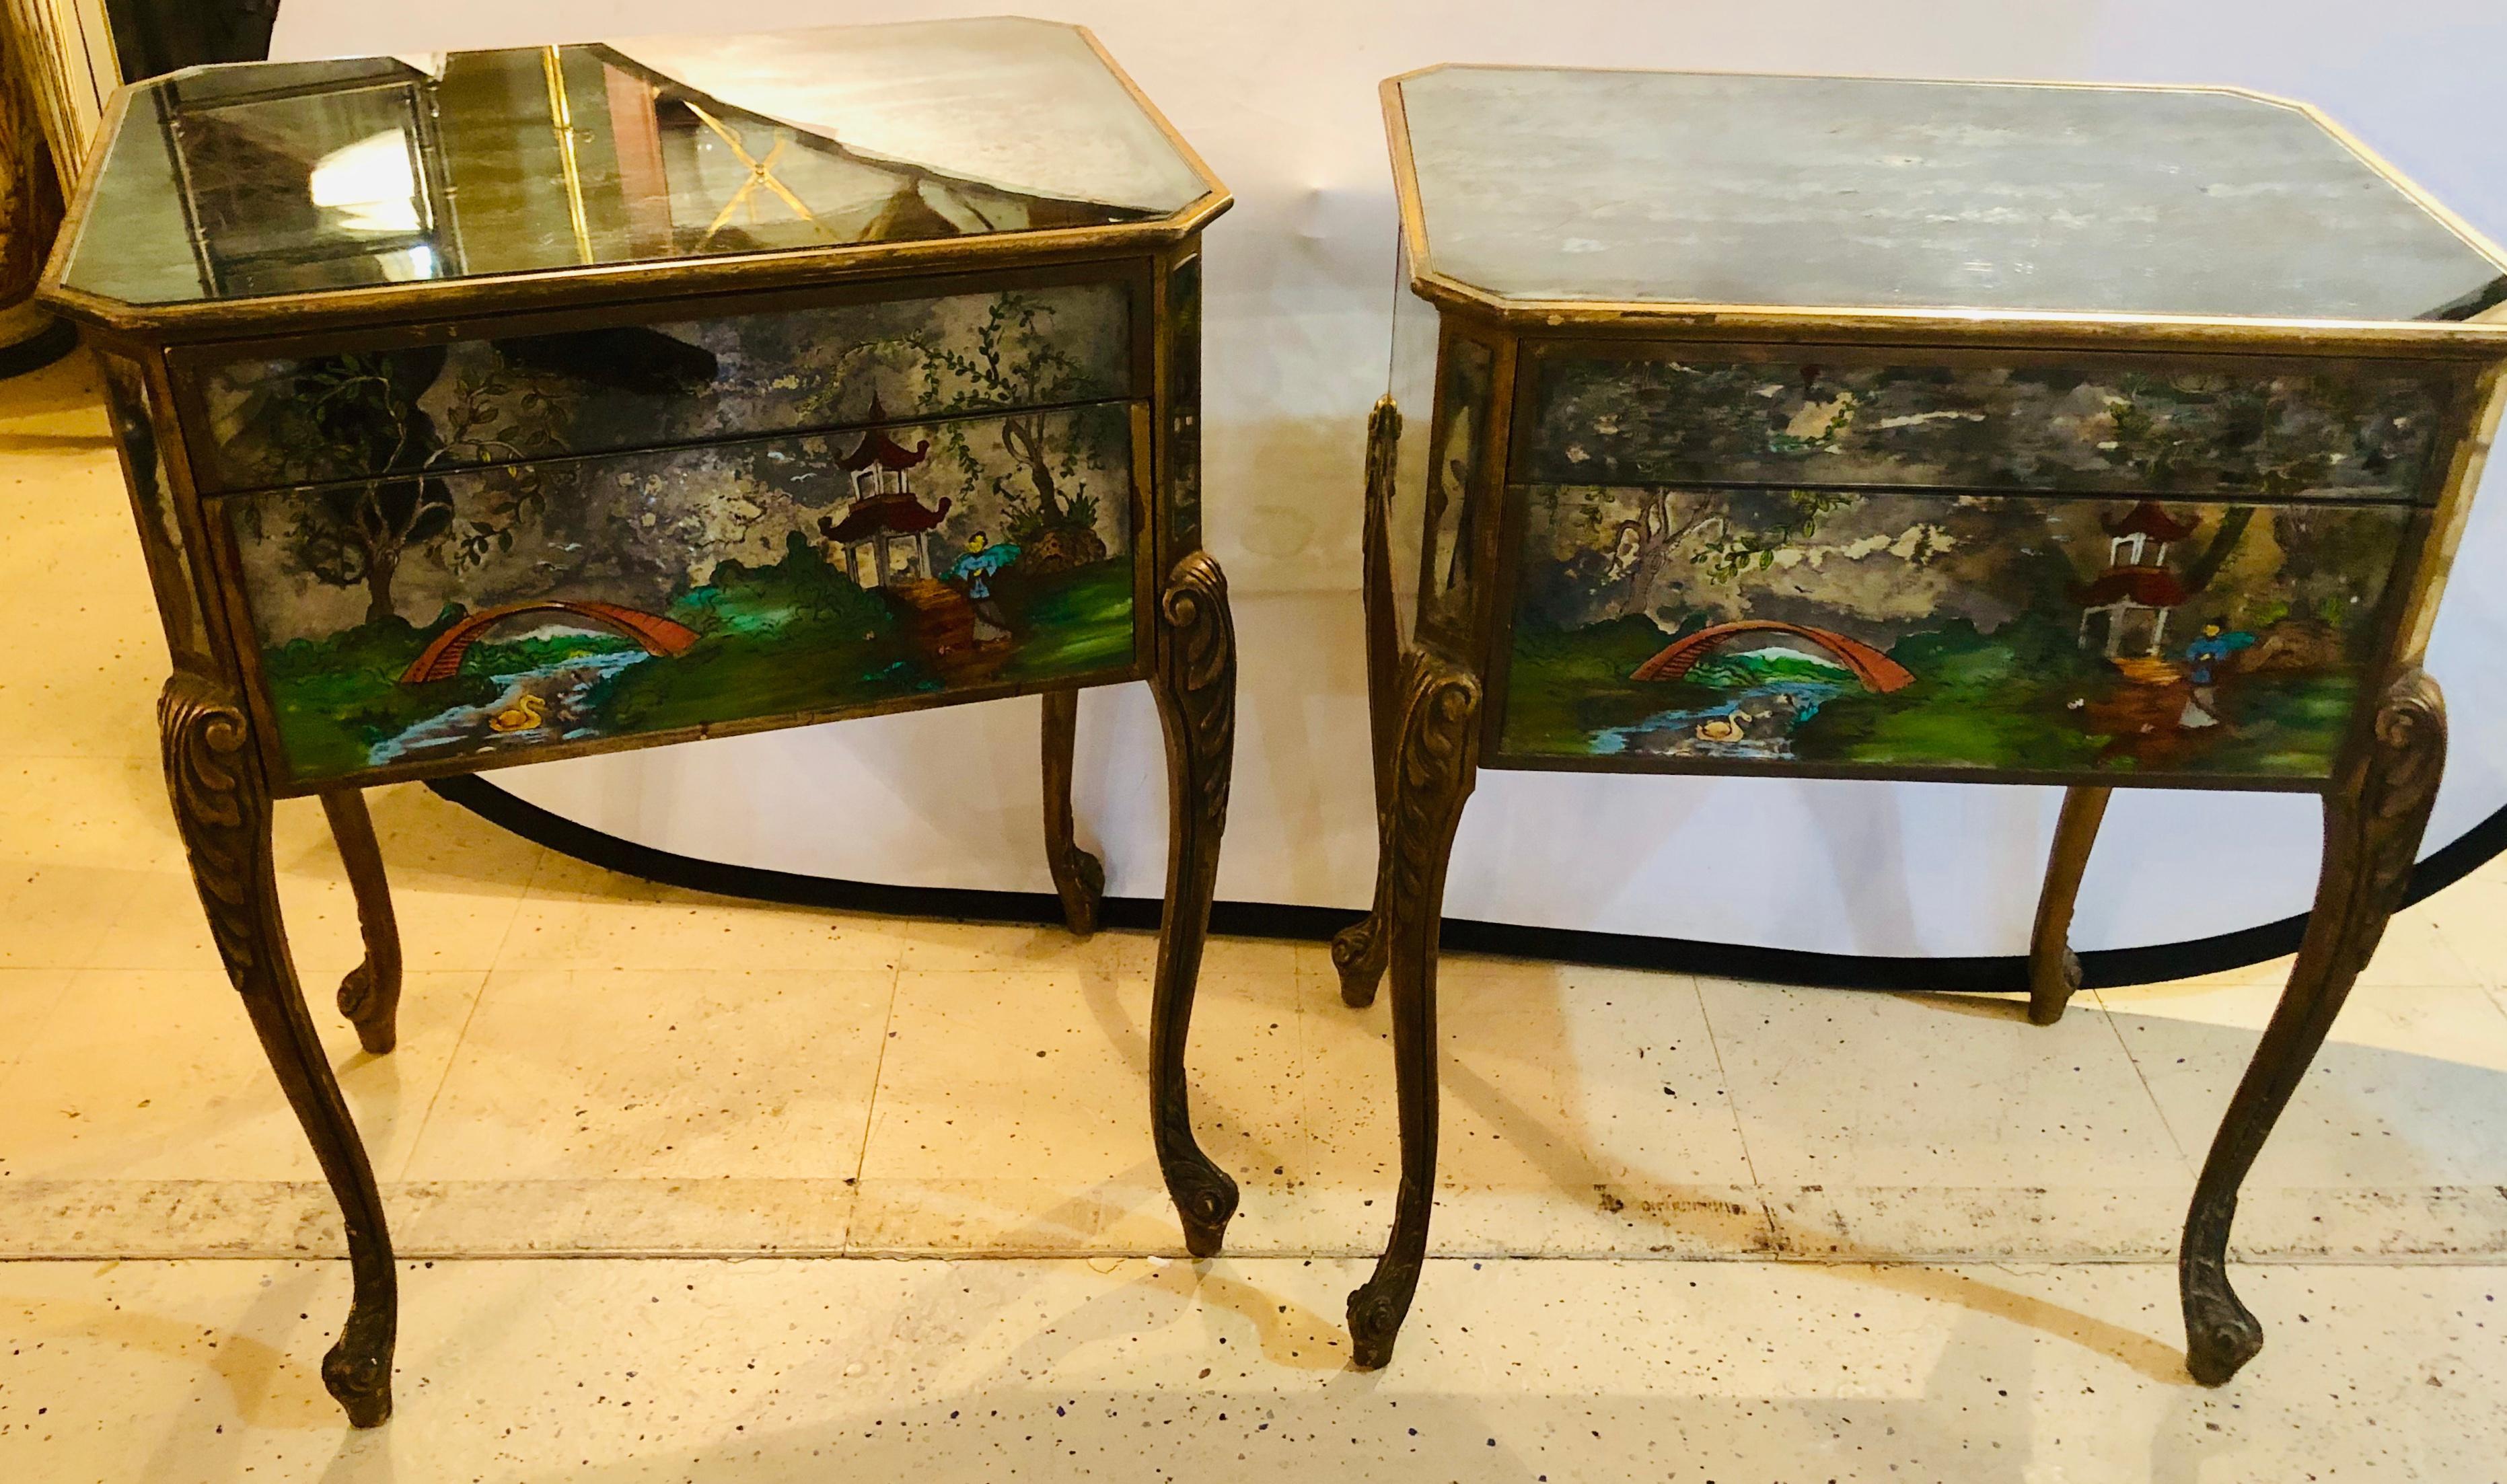 Pair of Hollywood Regency painted end or night tables on mirrored cases. Each having poly-chromed scenes depicting children amid the road leading to their home. The case itself painted decorated in a gilt gold finish and finely carved.